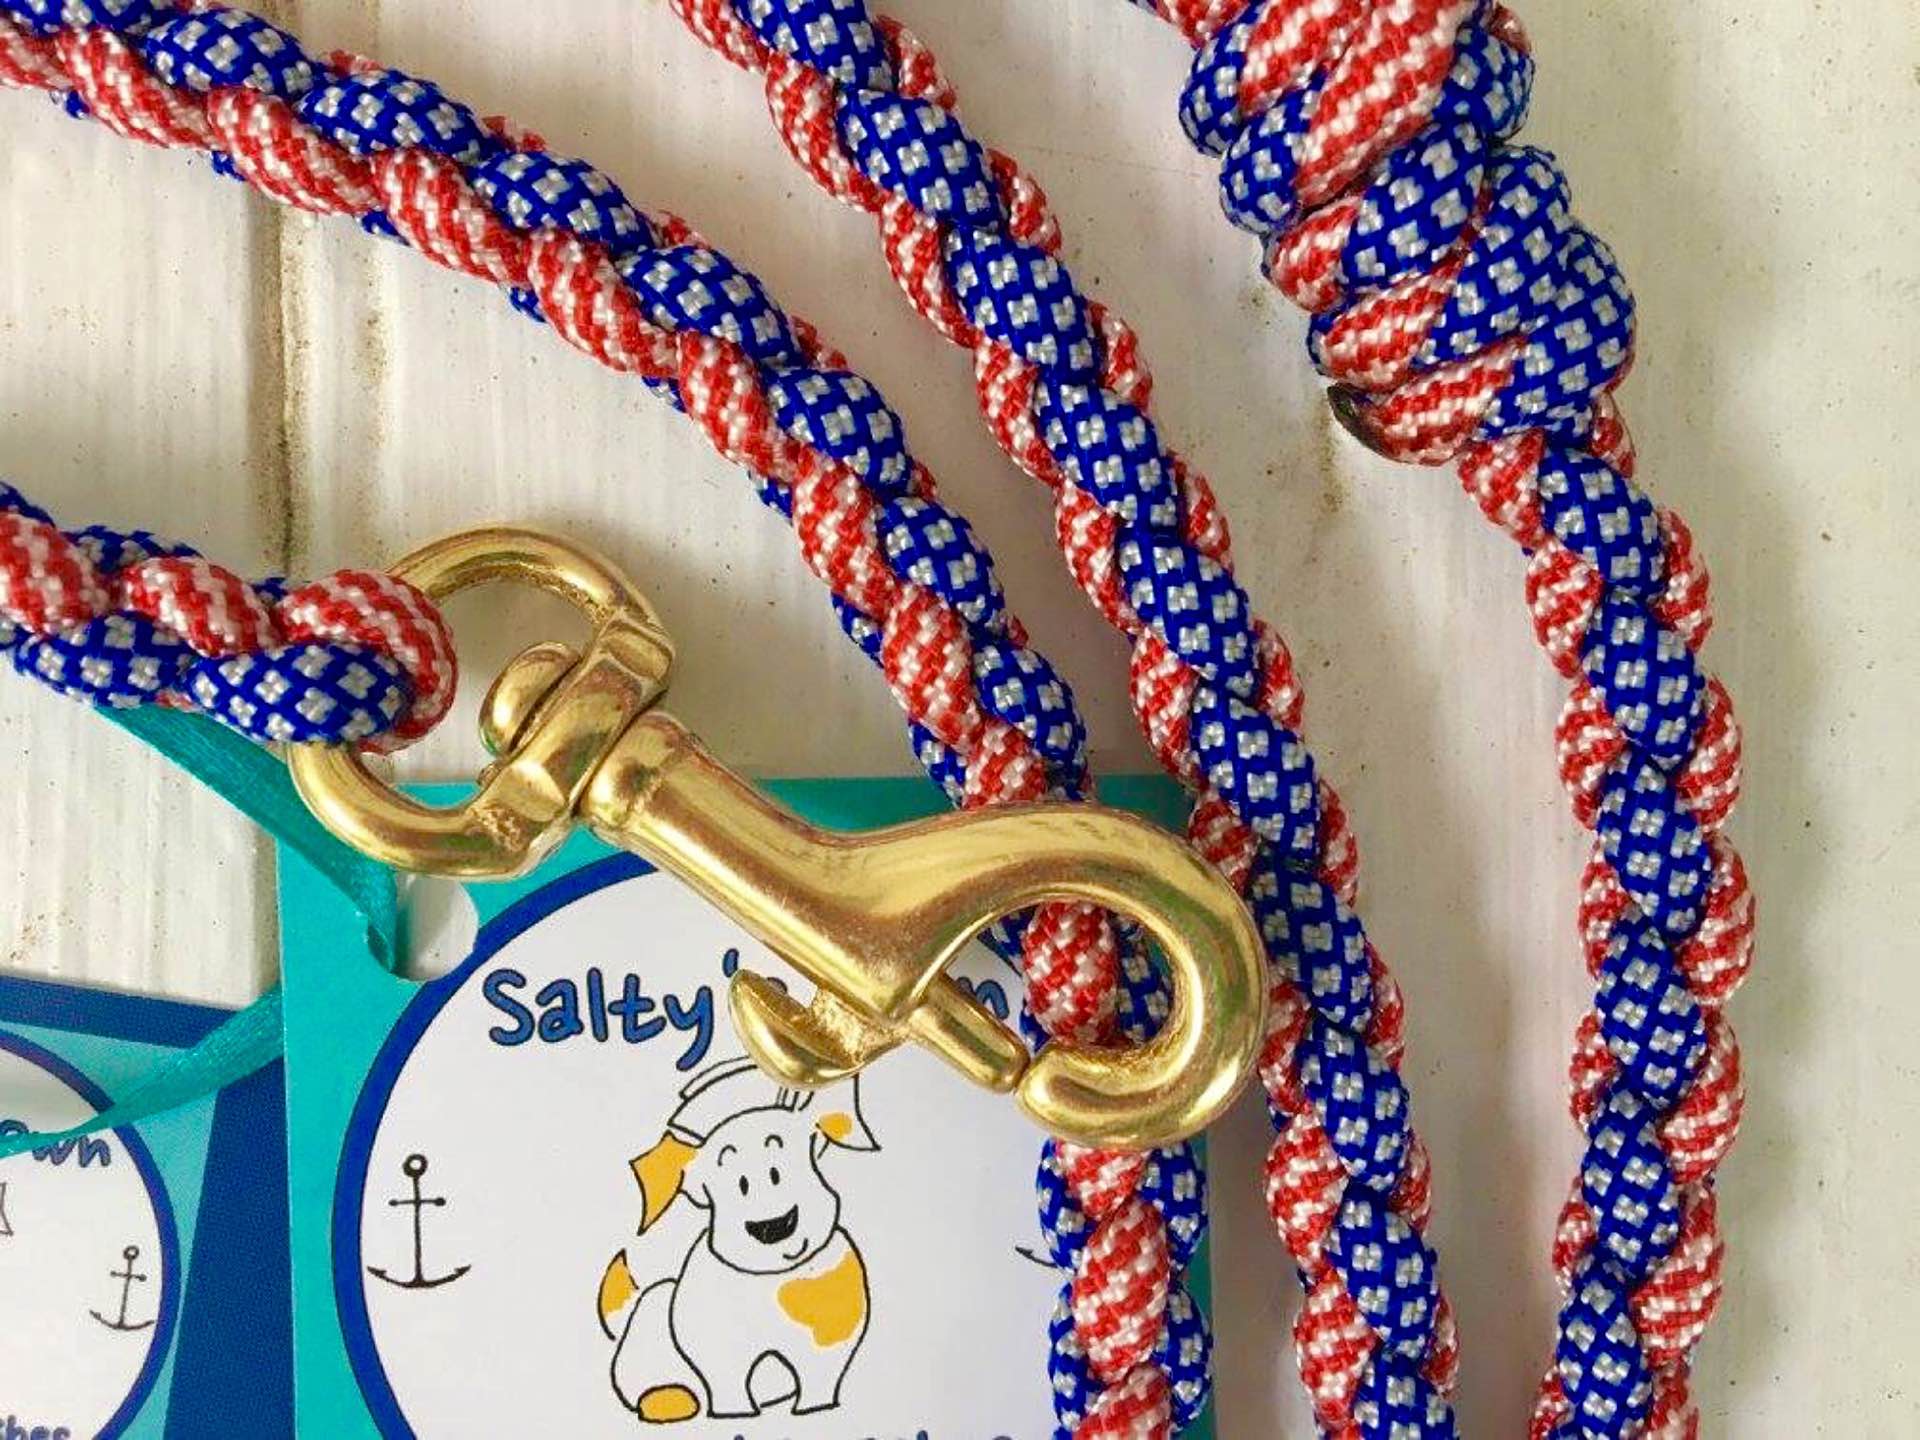 saltys-own-nautical-leashes